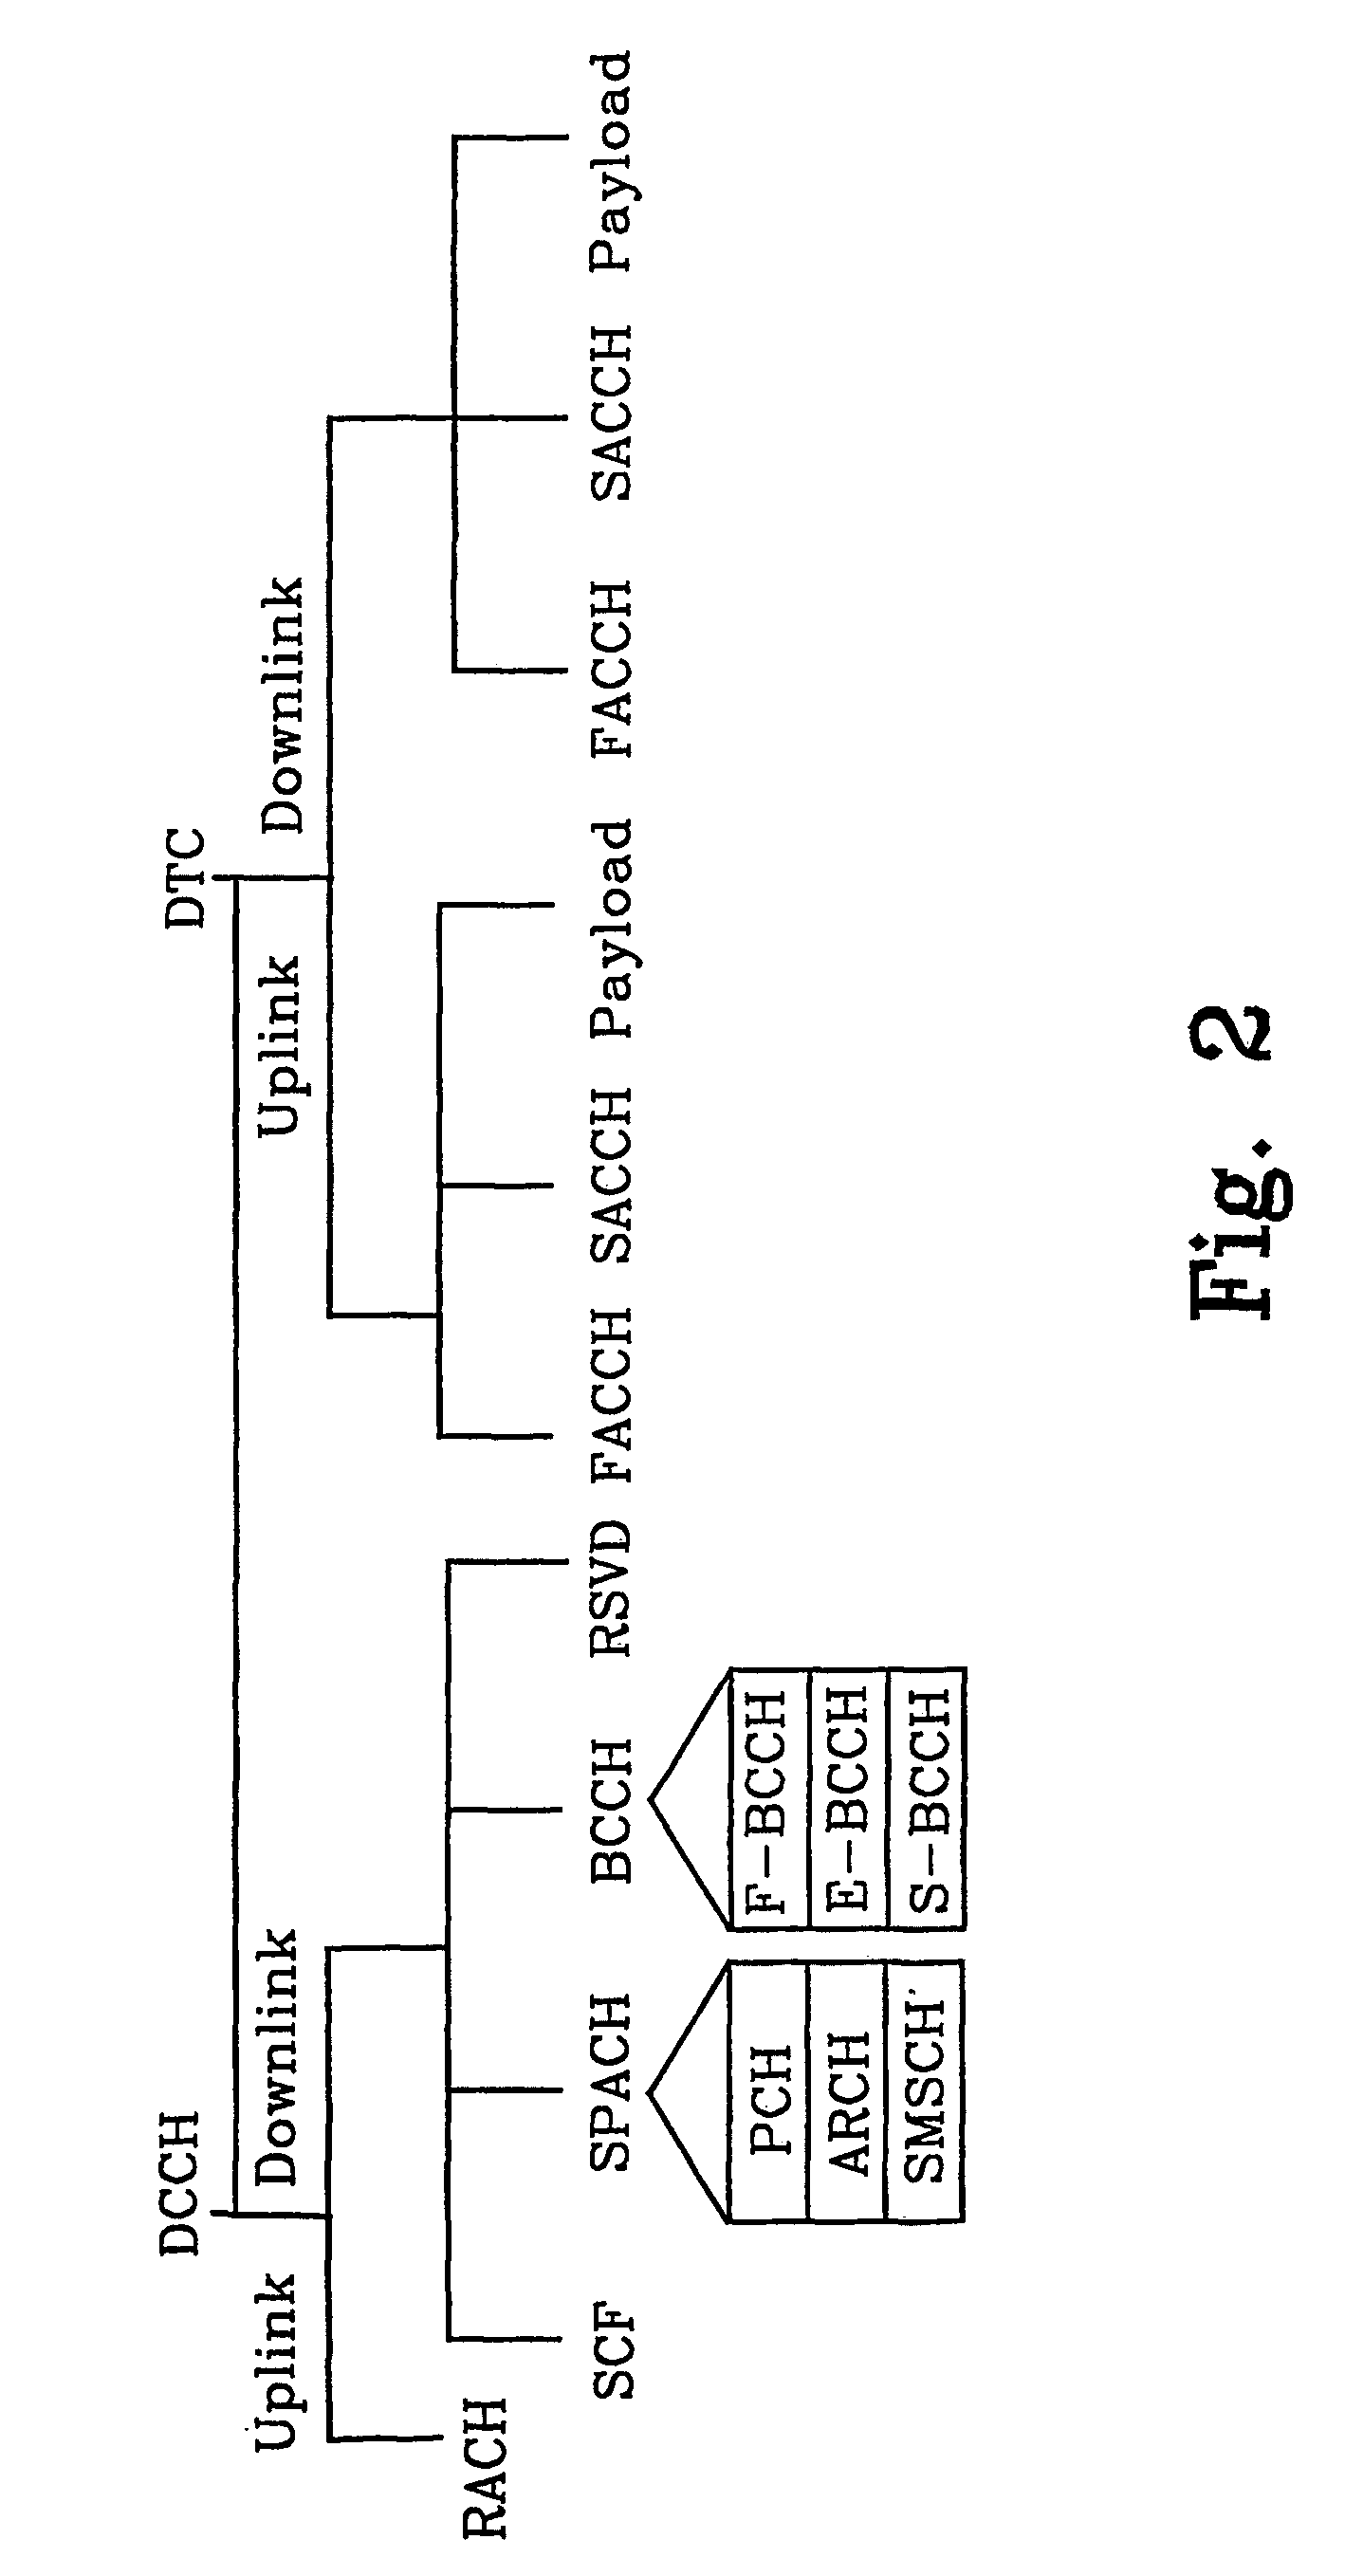 Method and apparatus for enhanced short message service